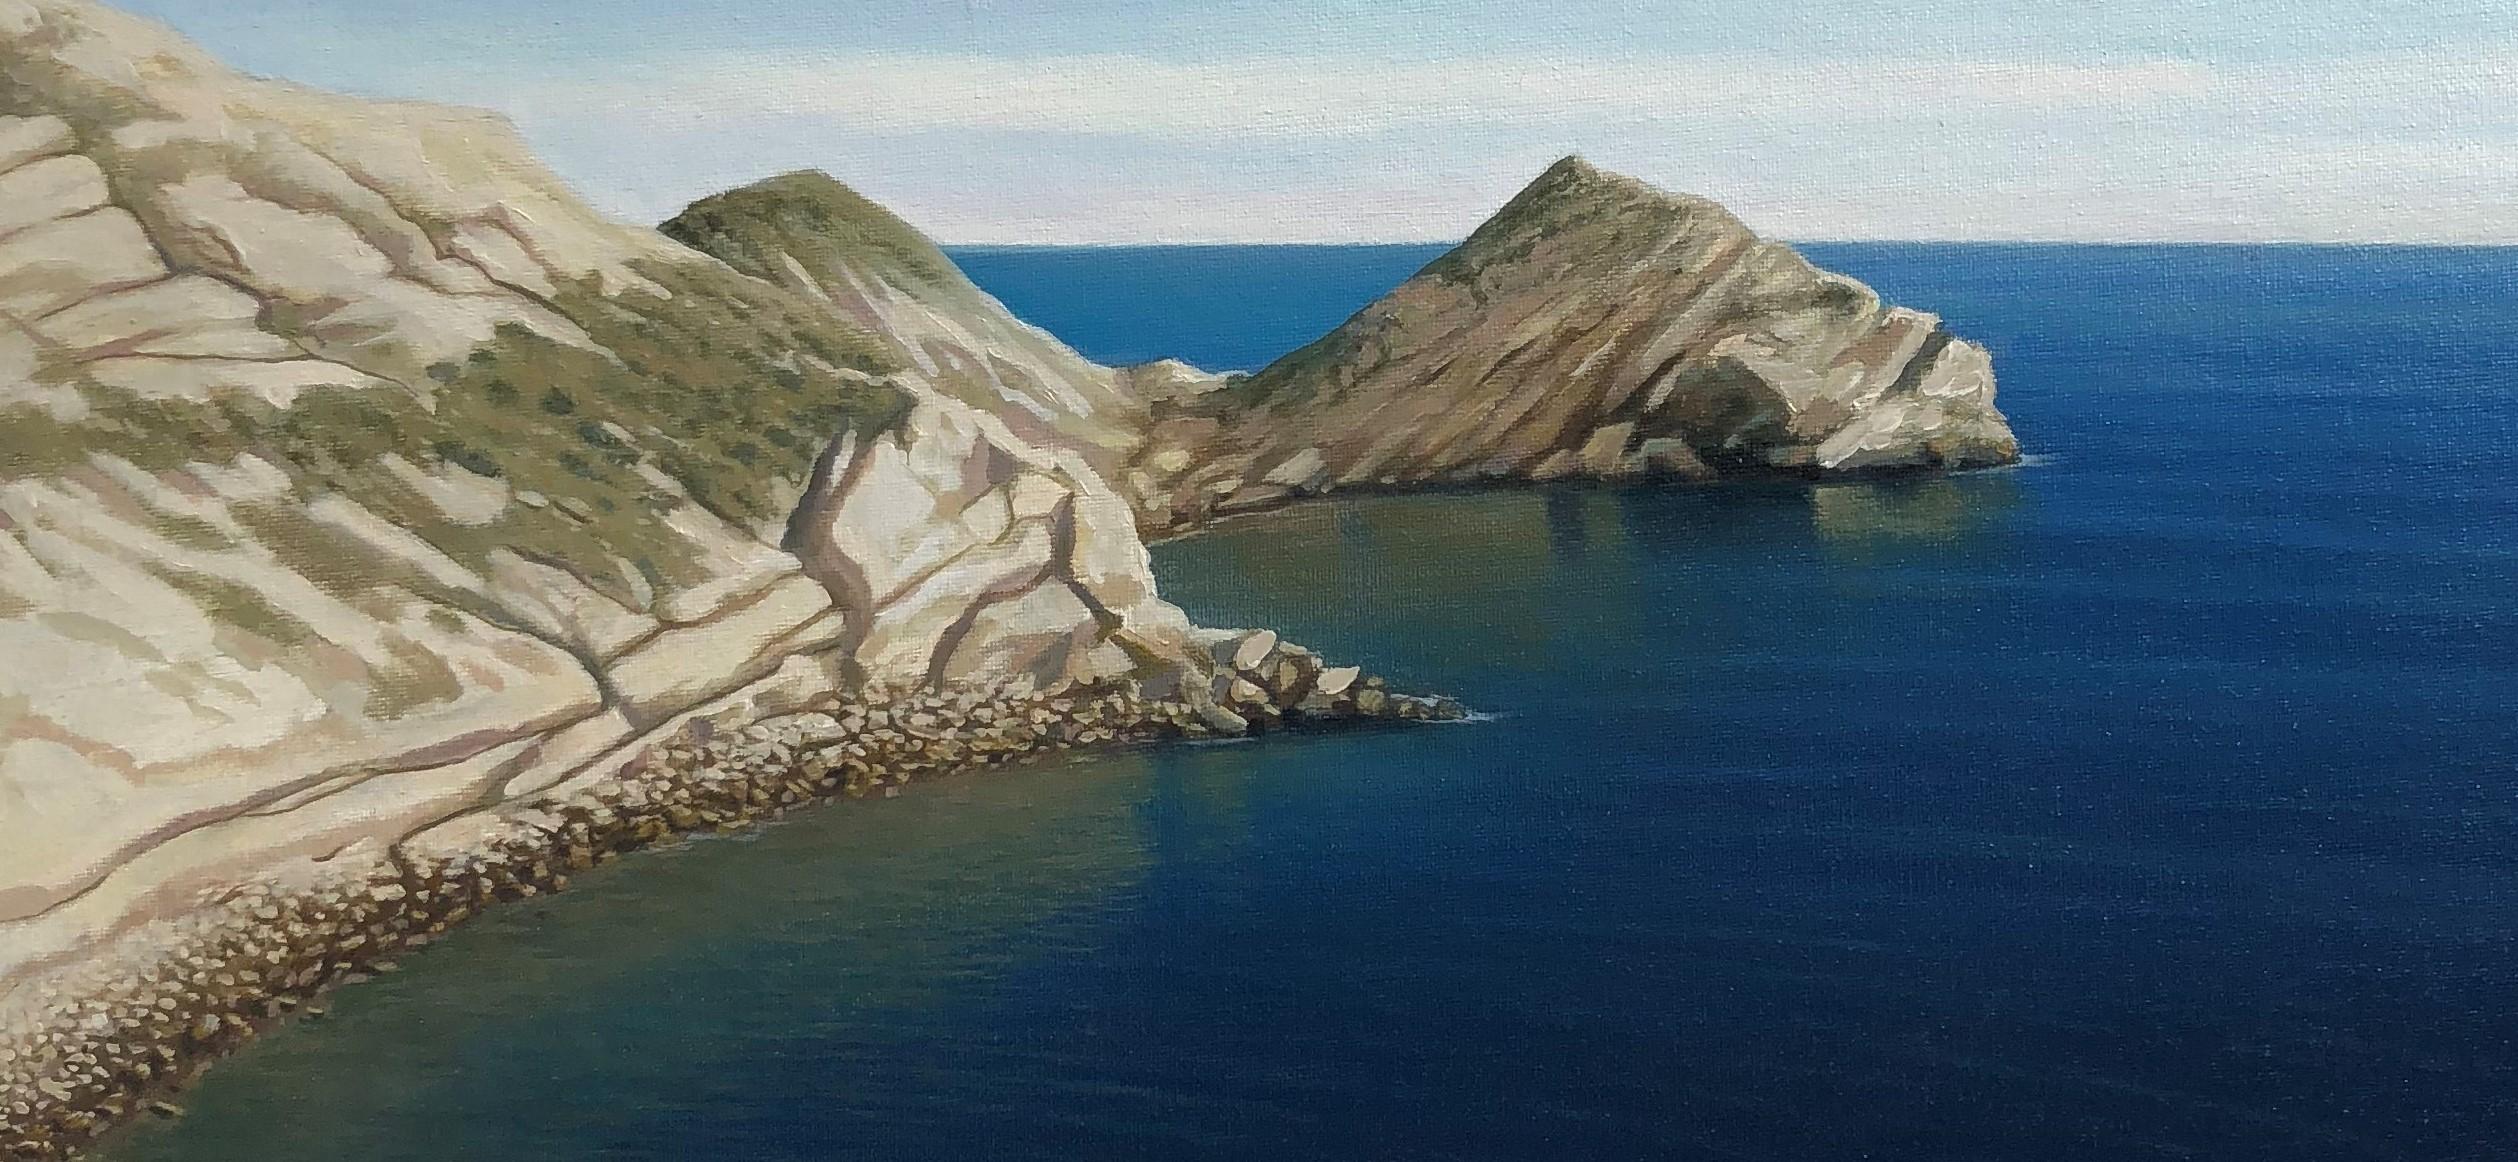 René Monzón Relova “Pozas” Figurative Painting - My Rest, Surreal Landscape of Cliffs and the Sea, Oil on Canvas